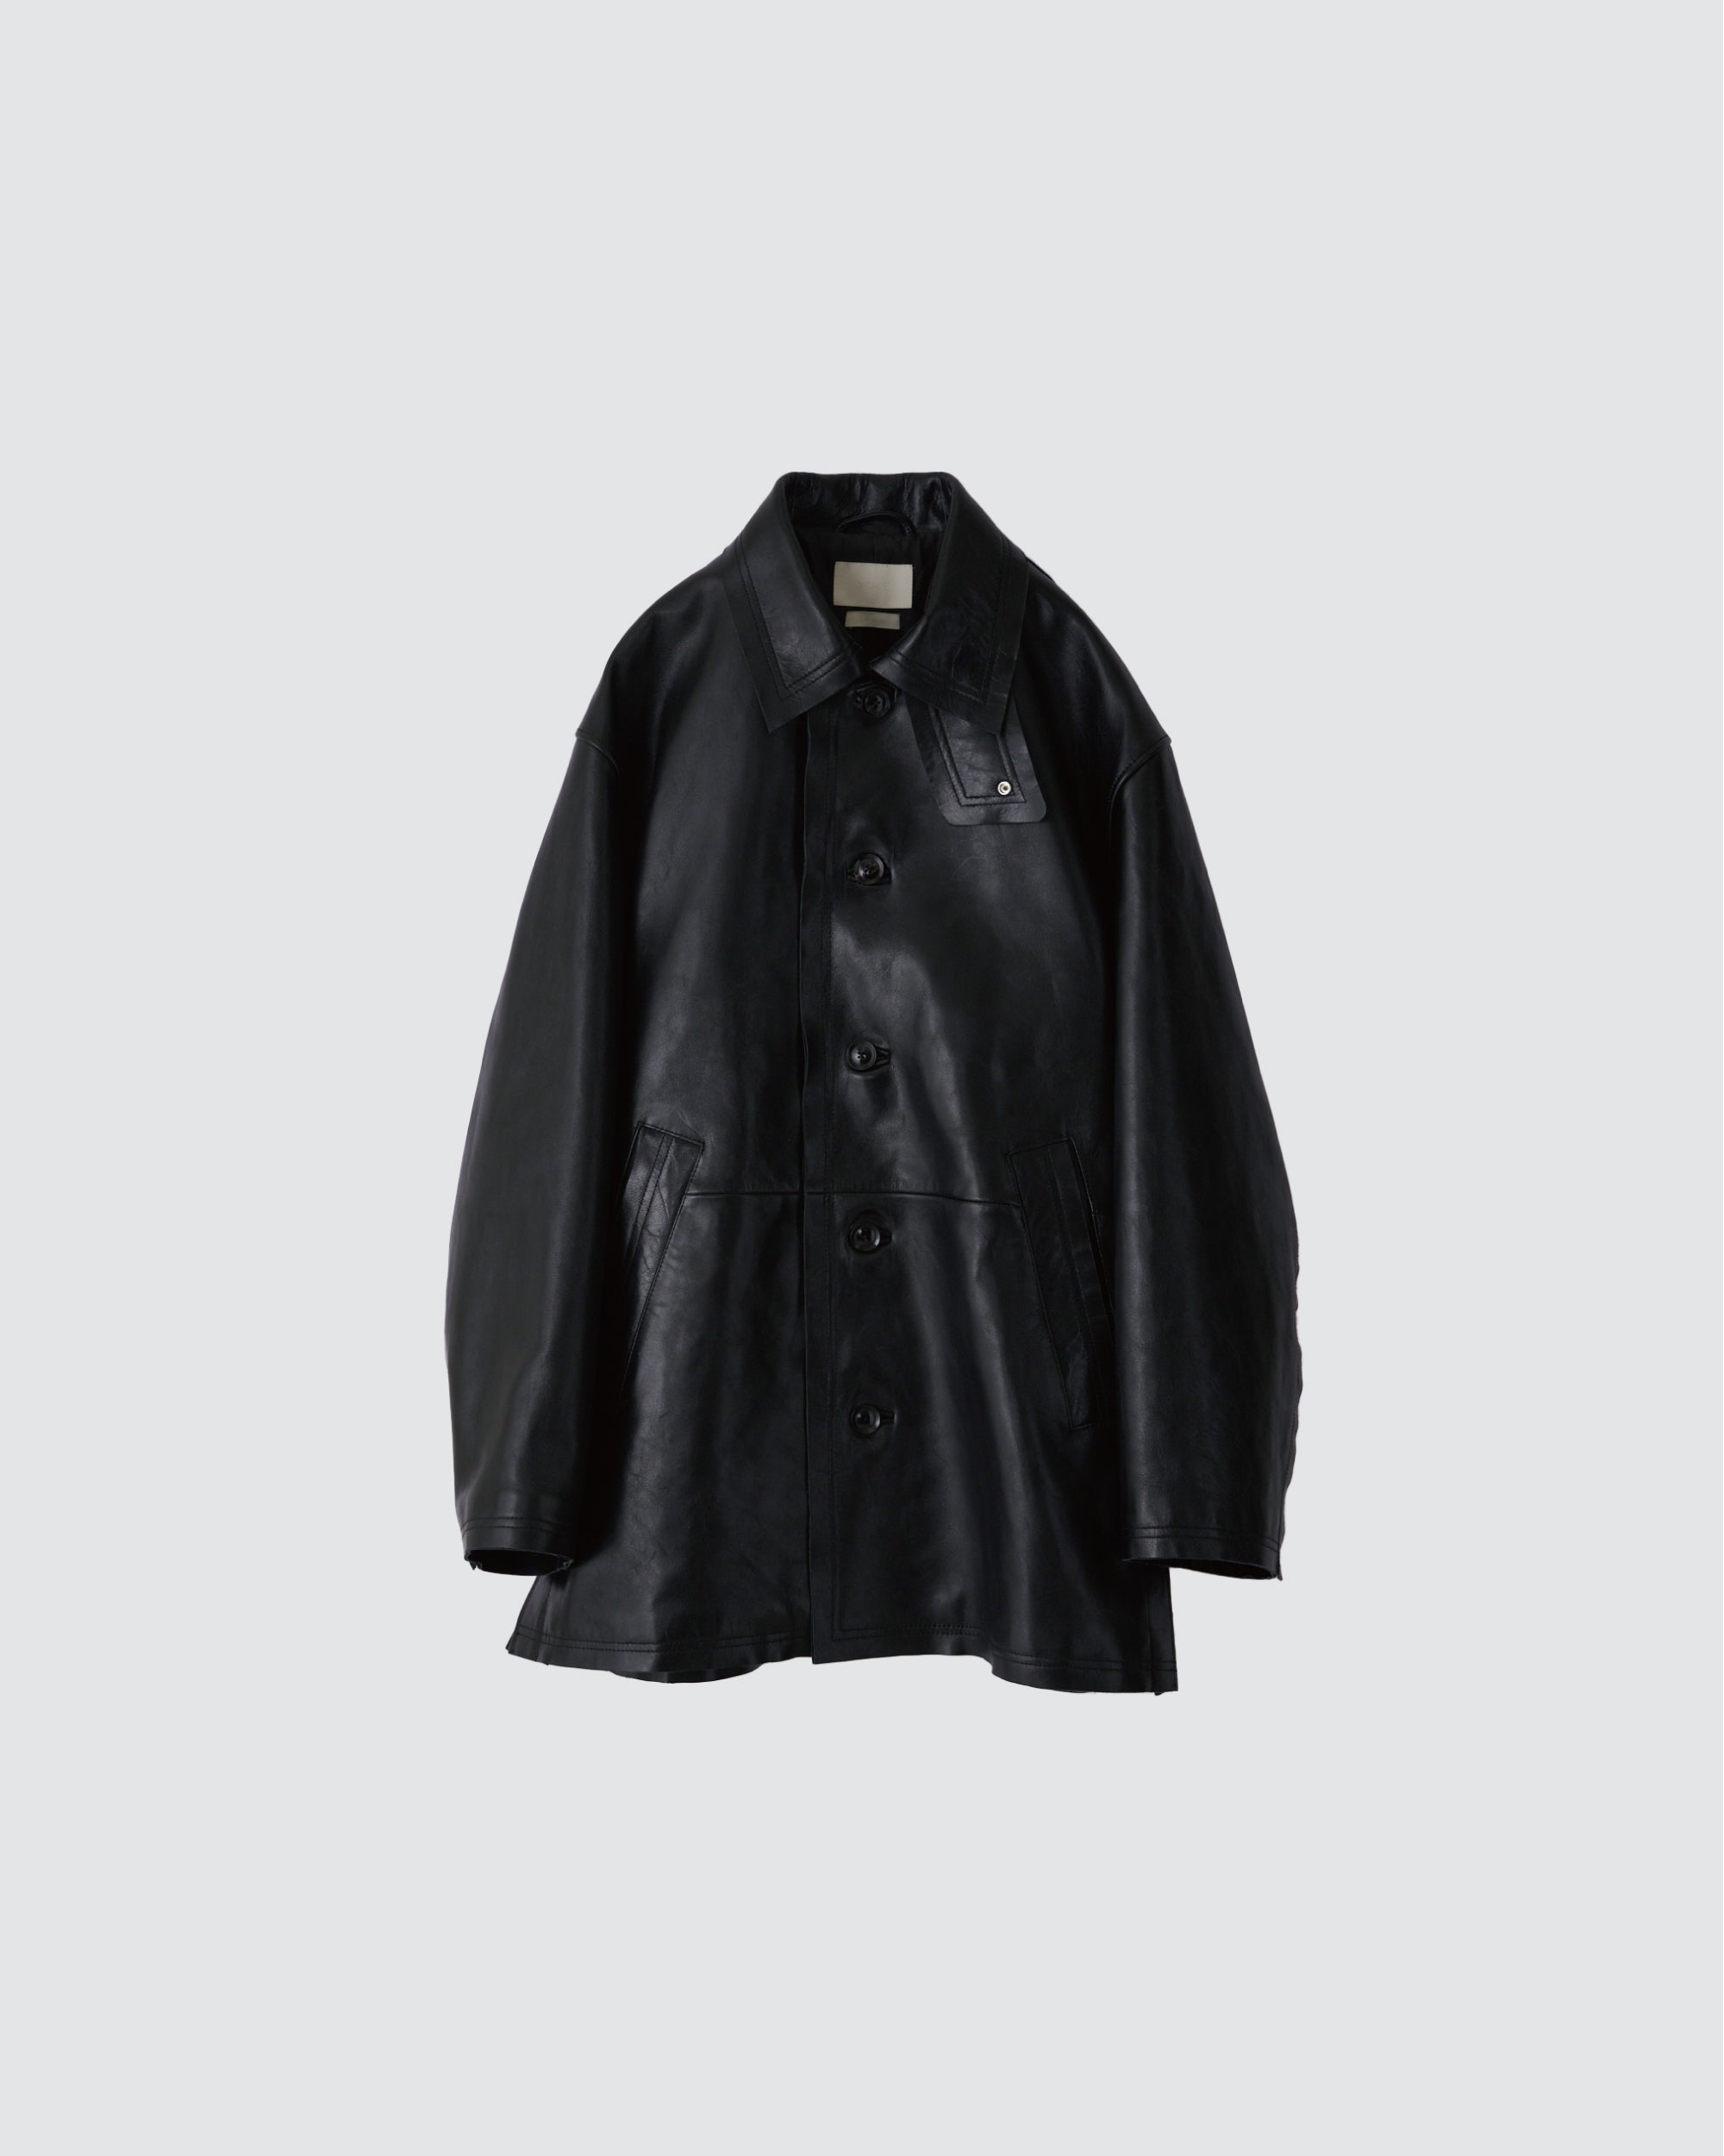 CUT-OFF LEATHER CAR COAT BLACK – TIME AFTER TIME